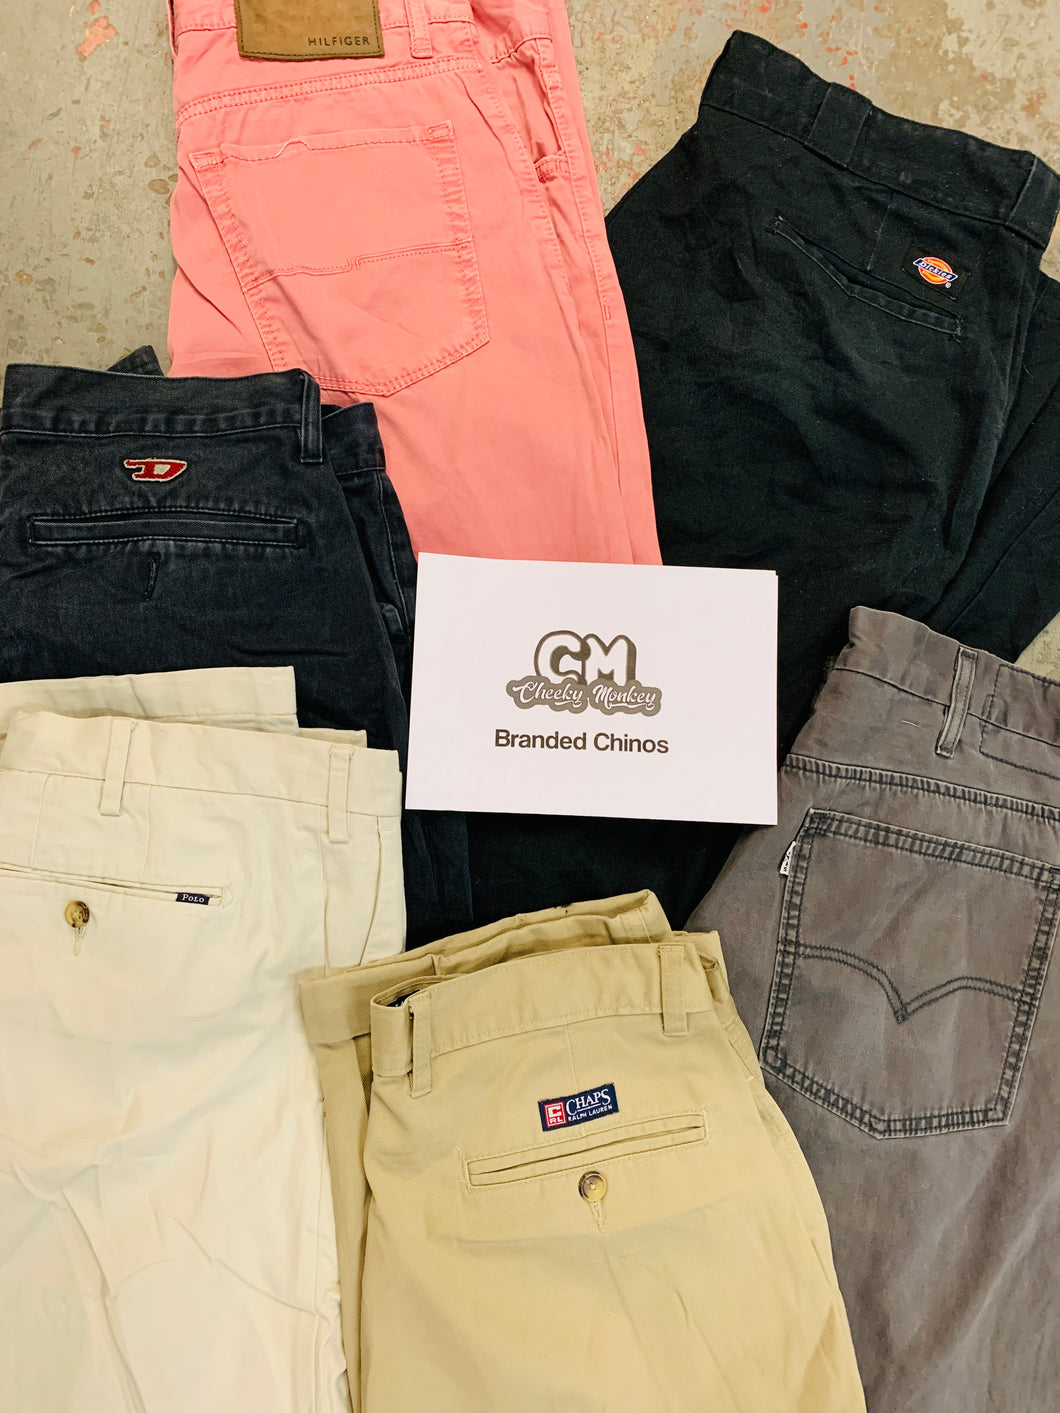 BRANDED CHINOS - 40 PIECES